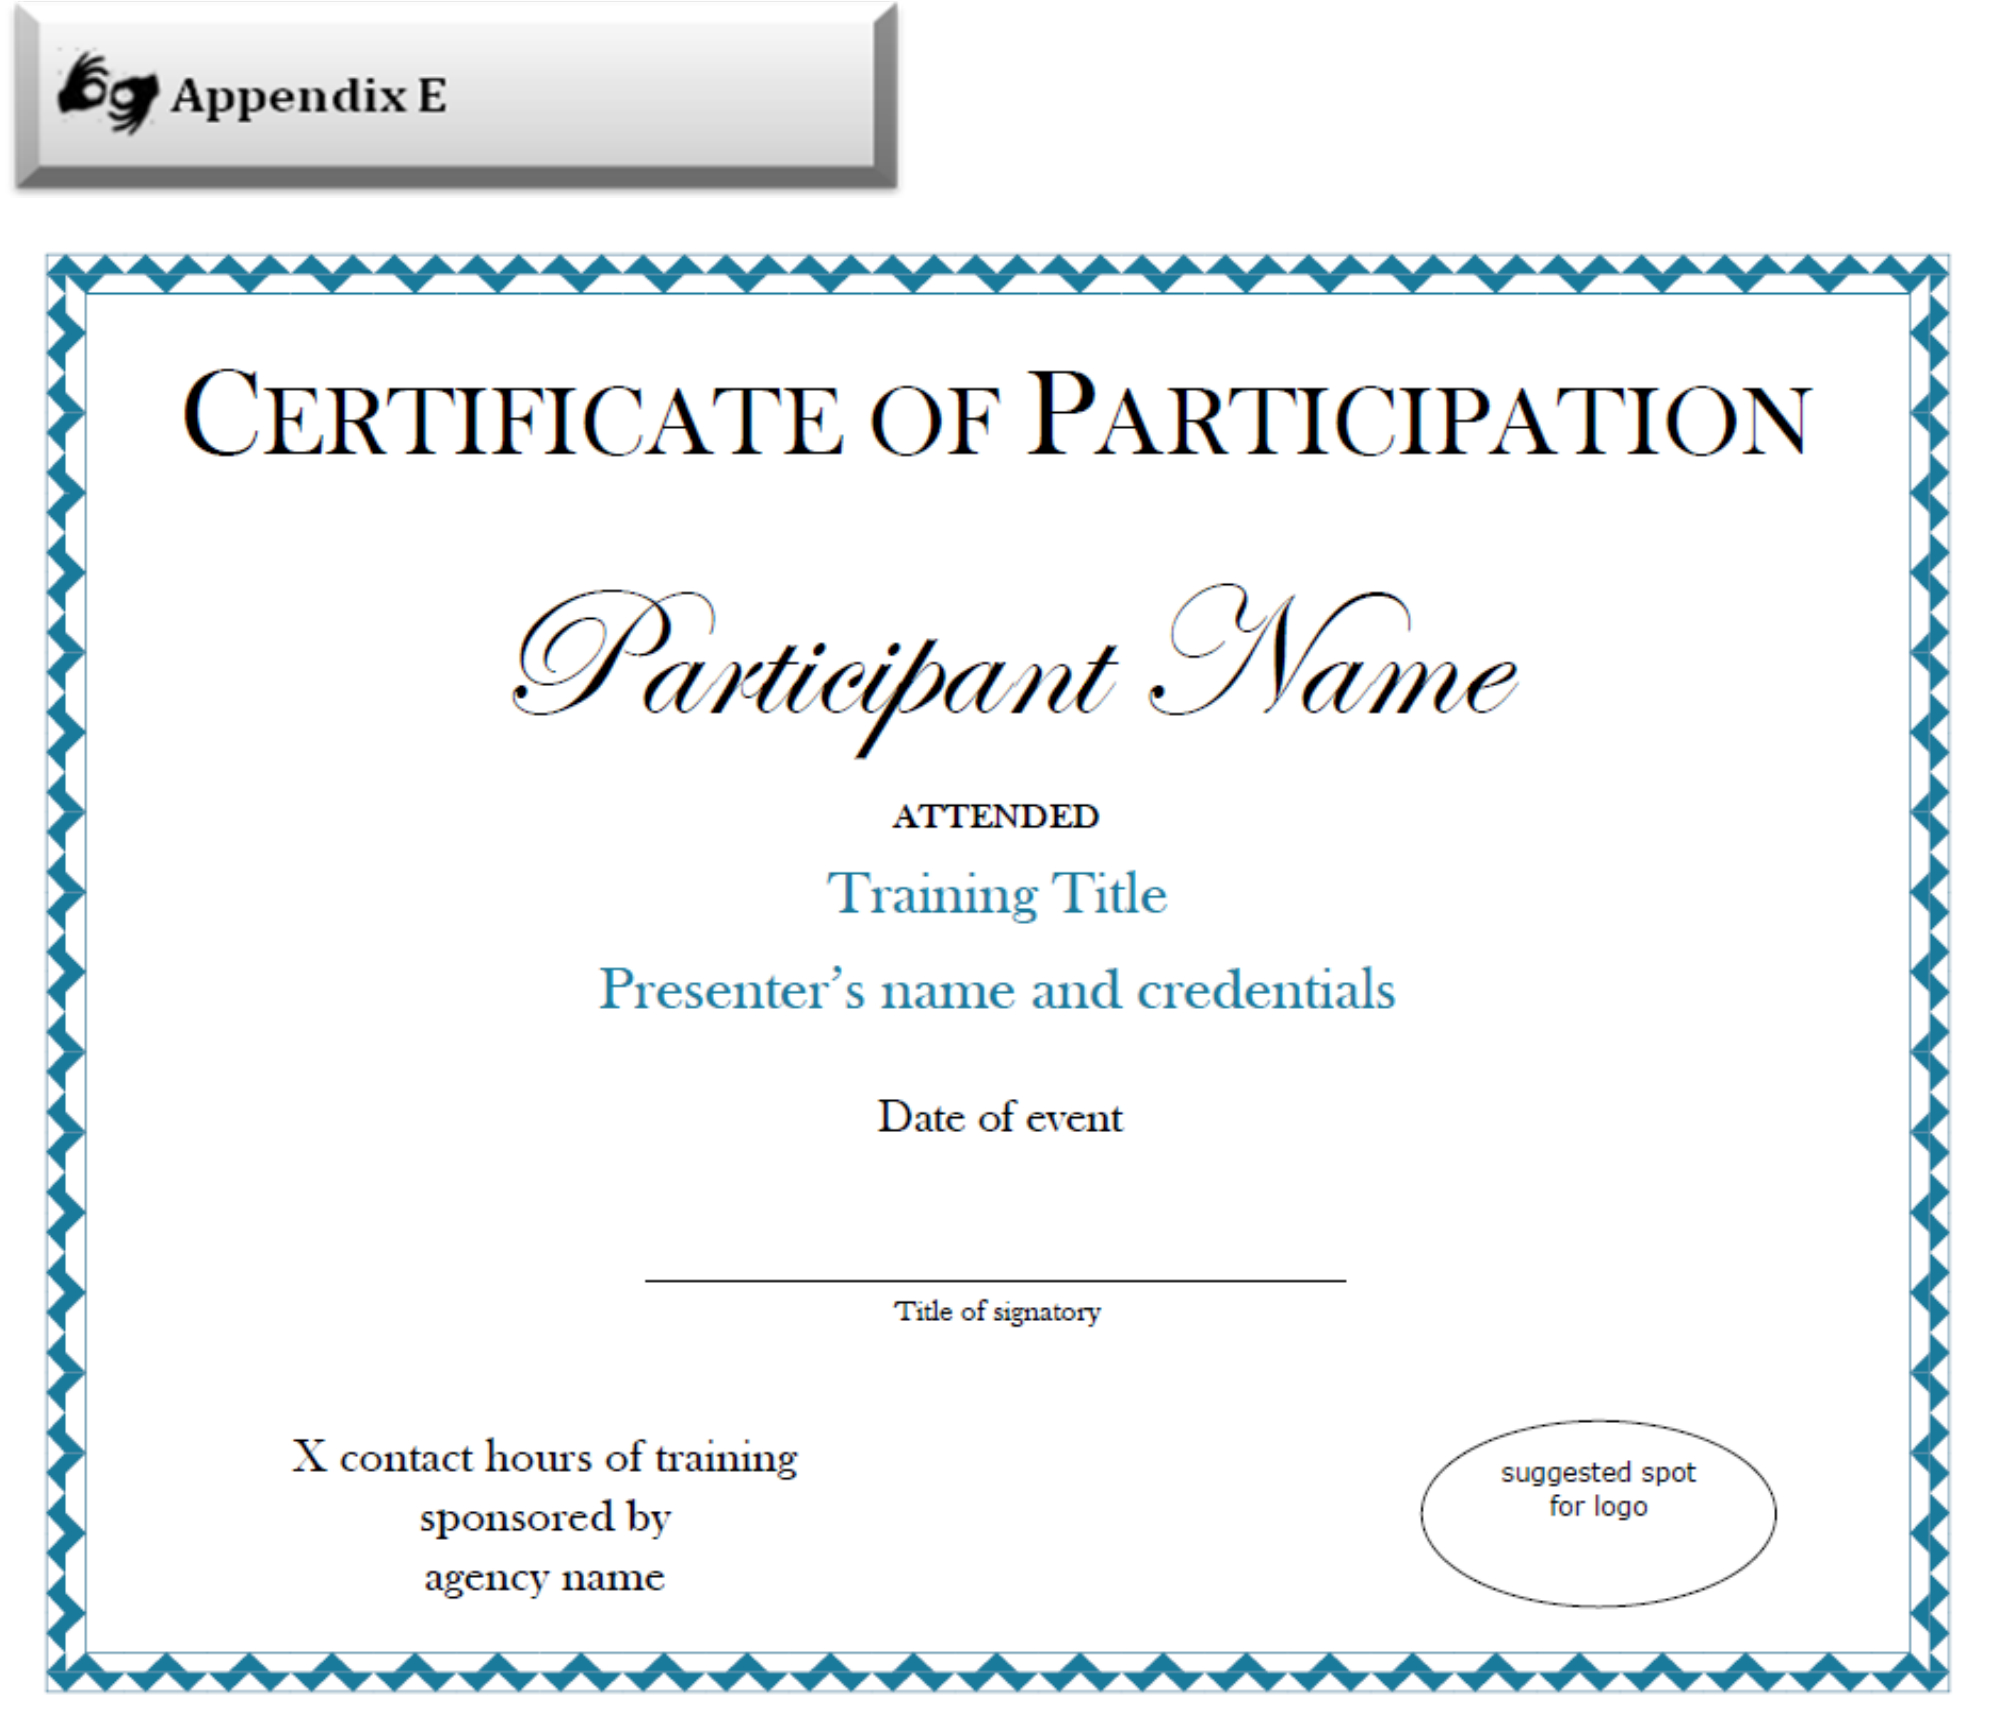 Certificate Of Participation Sample Free Download Intended For Certification Of Participation Free Template